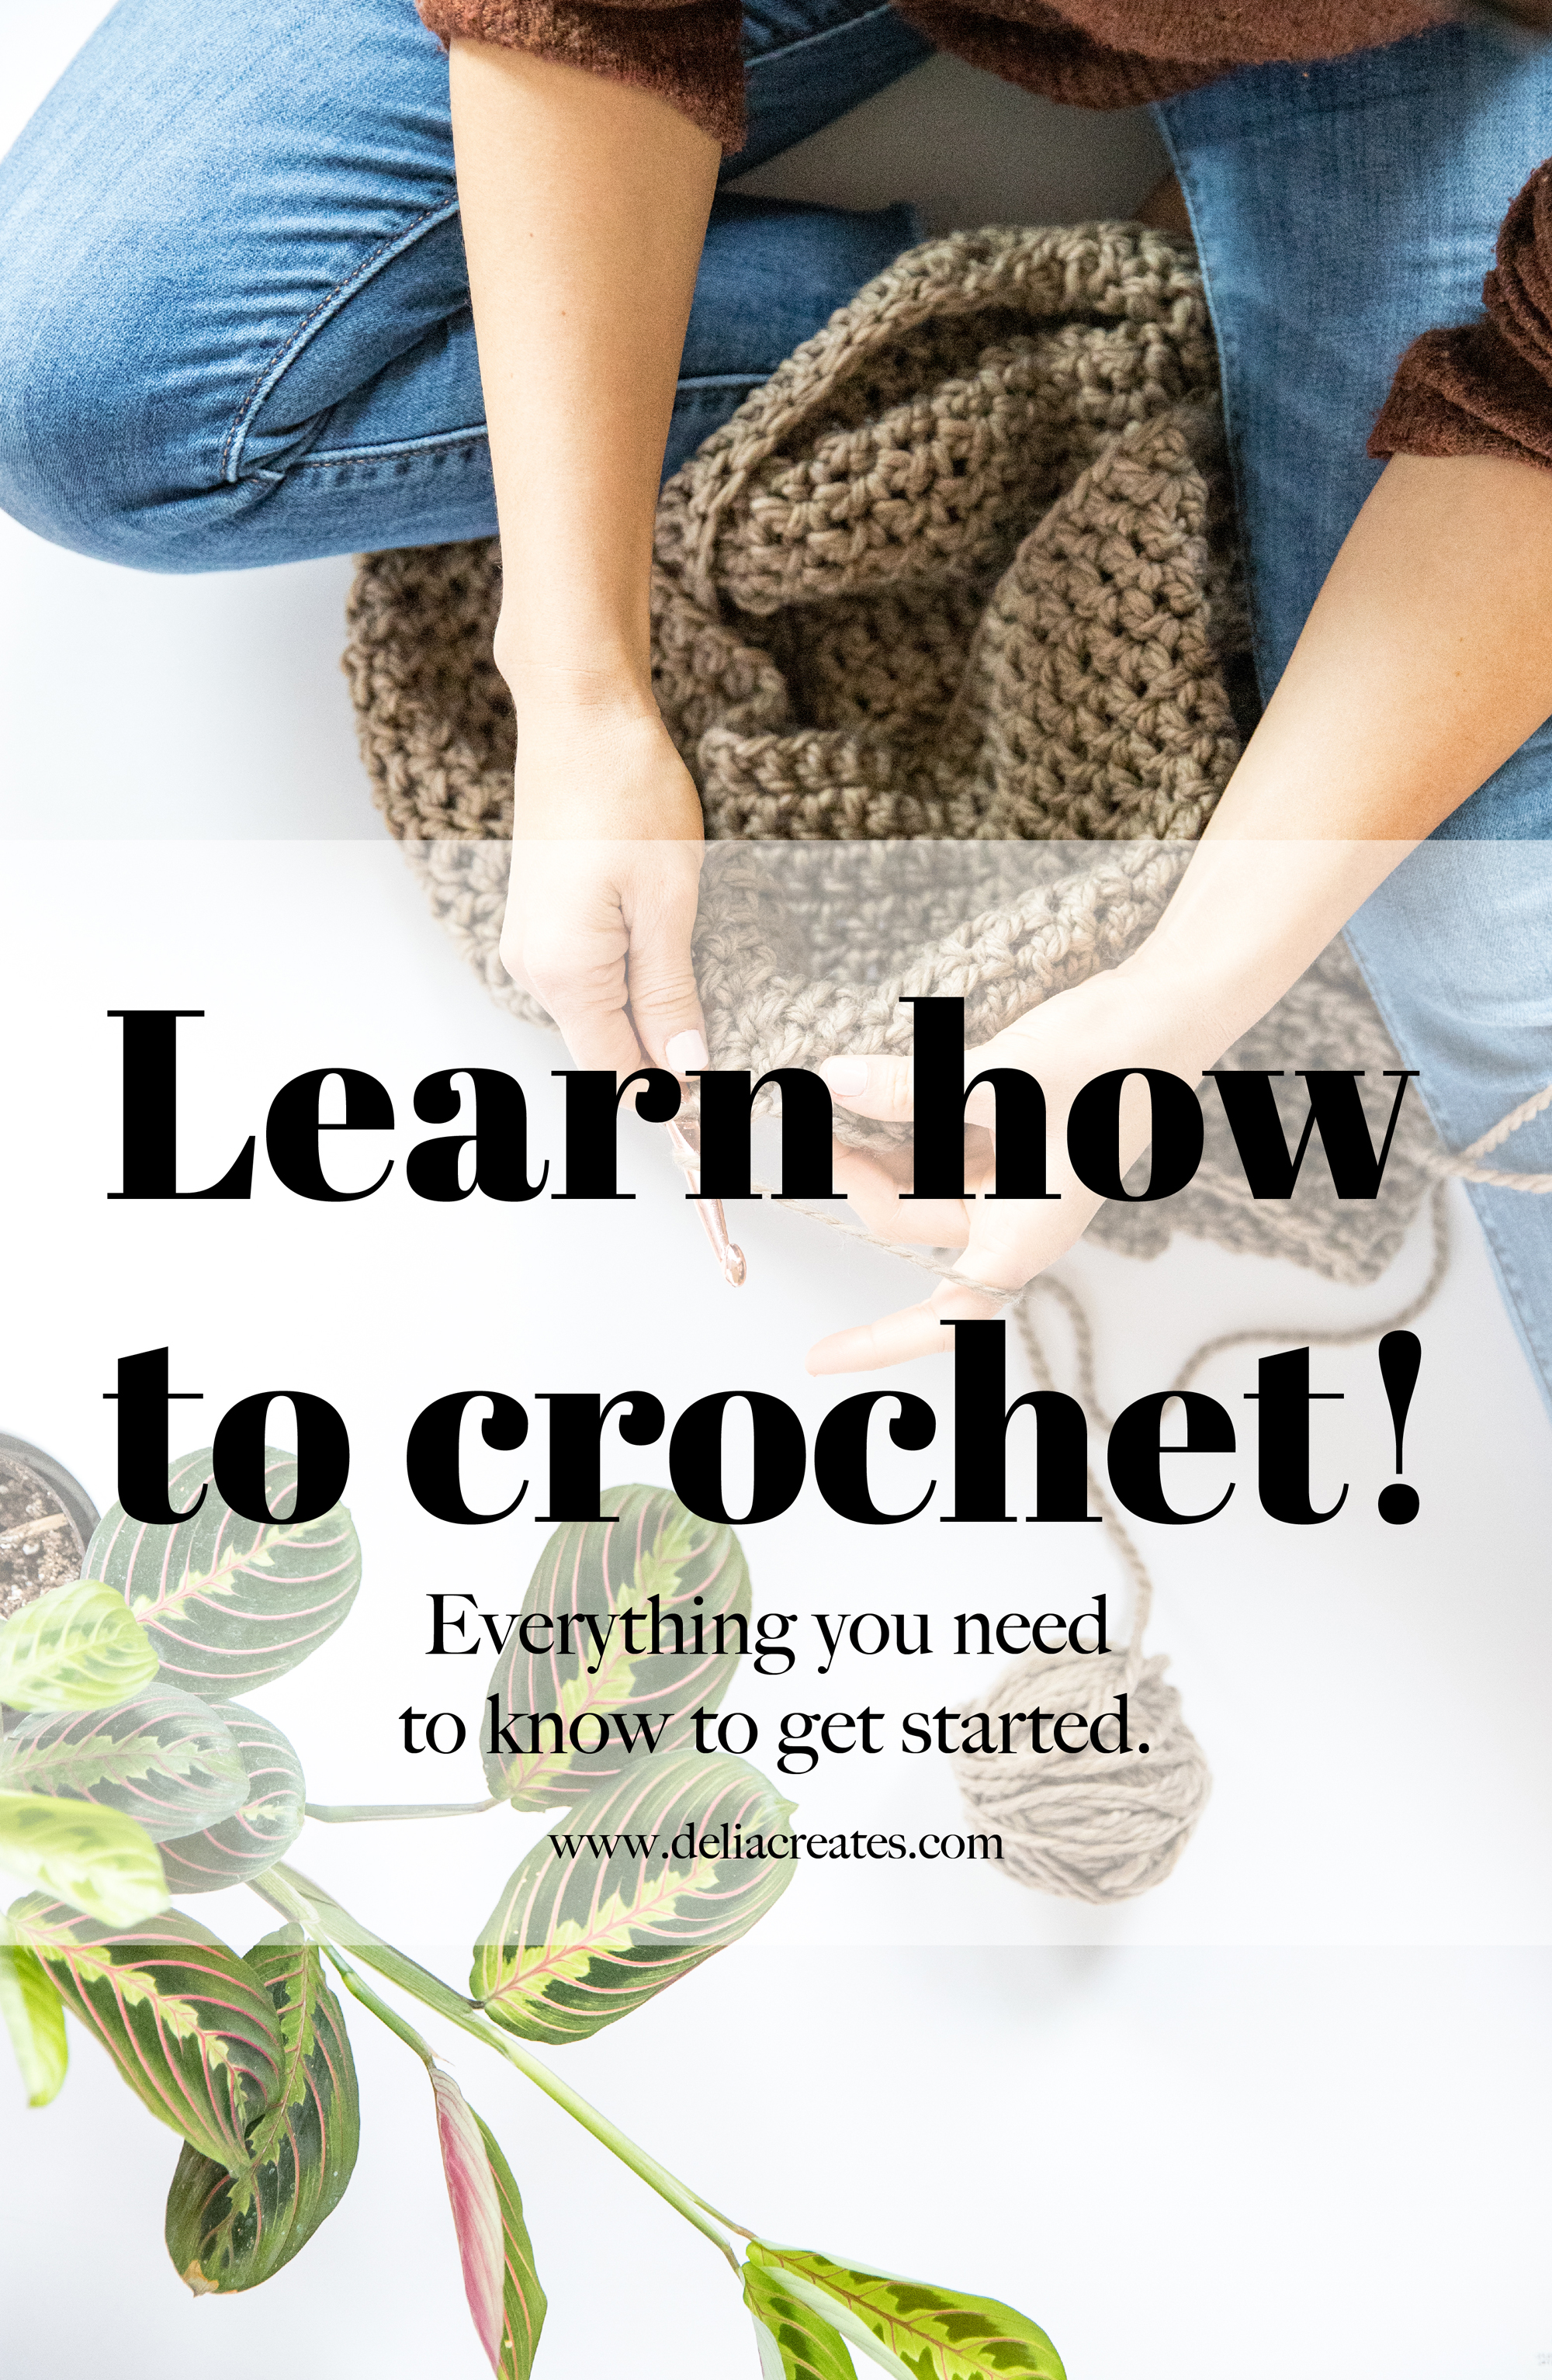 Learn how to crochet! - Easy video tutorials and everything you need to know to get started // www.deliacreates.com